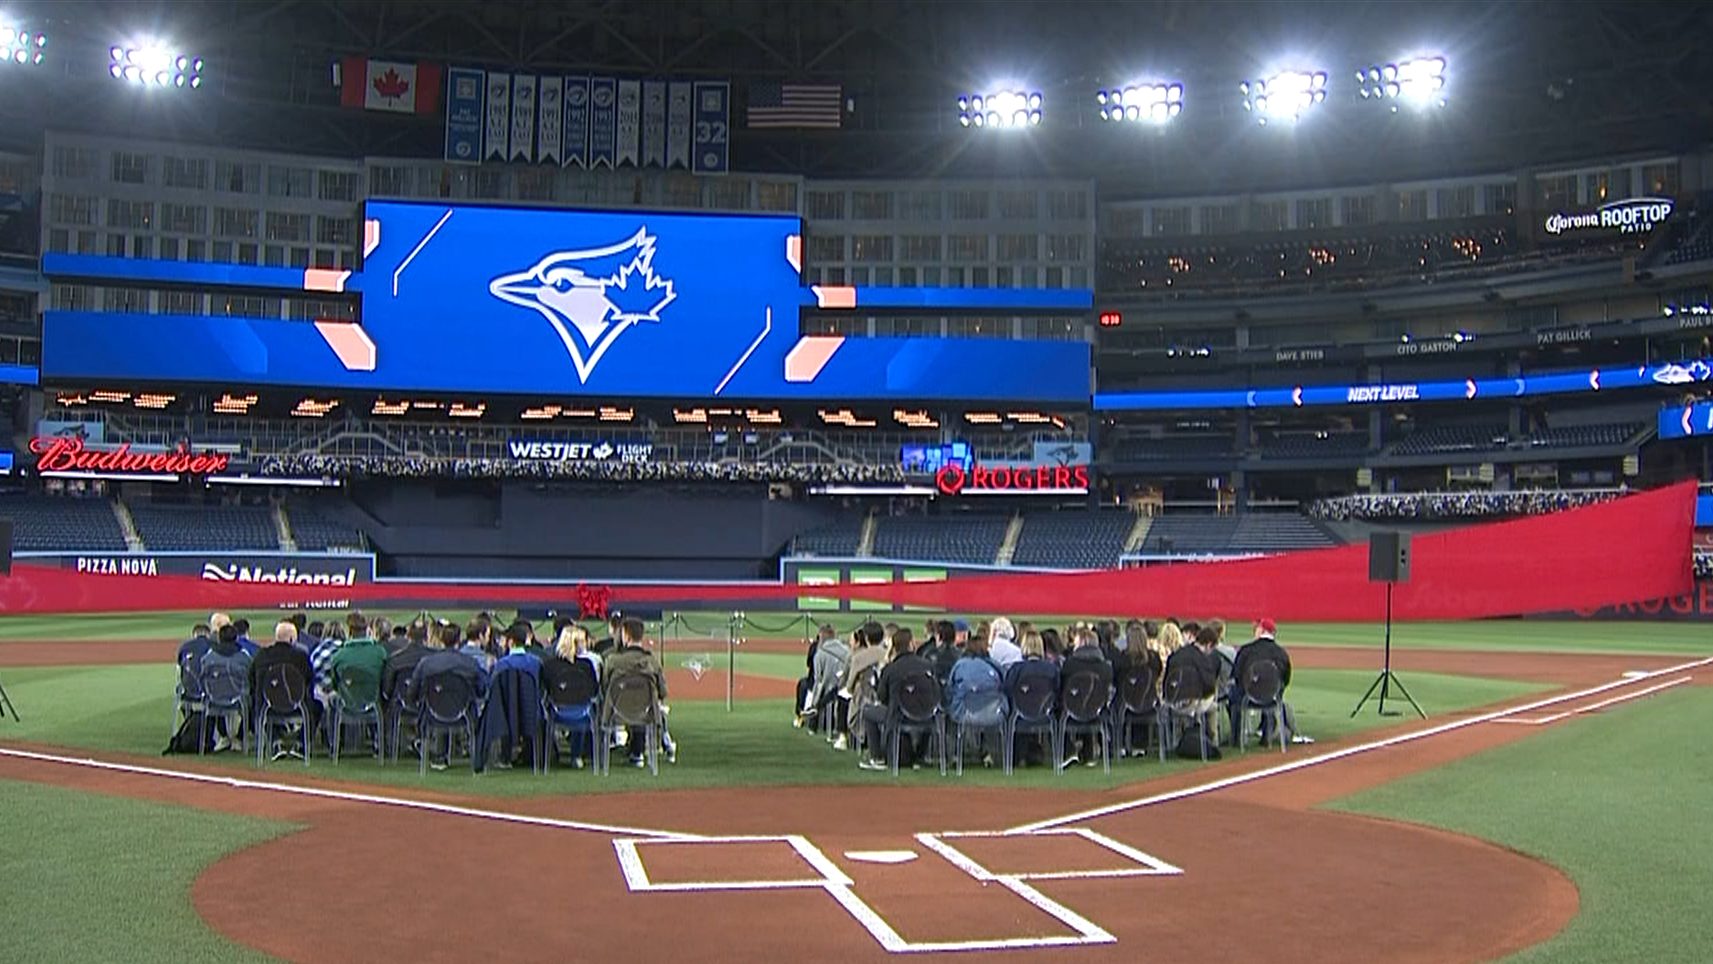 Toronto Blue Jays Will Head Home to Renovated Rogers Centre - The